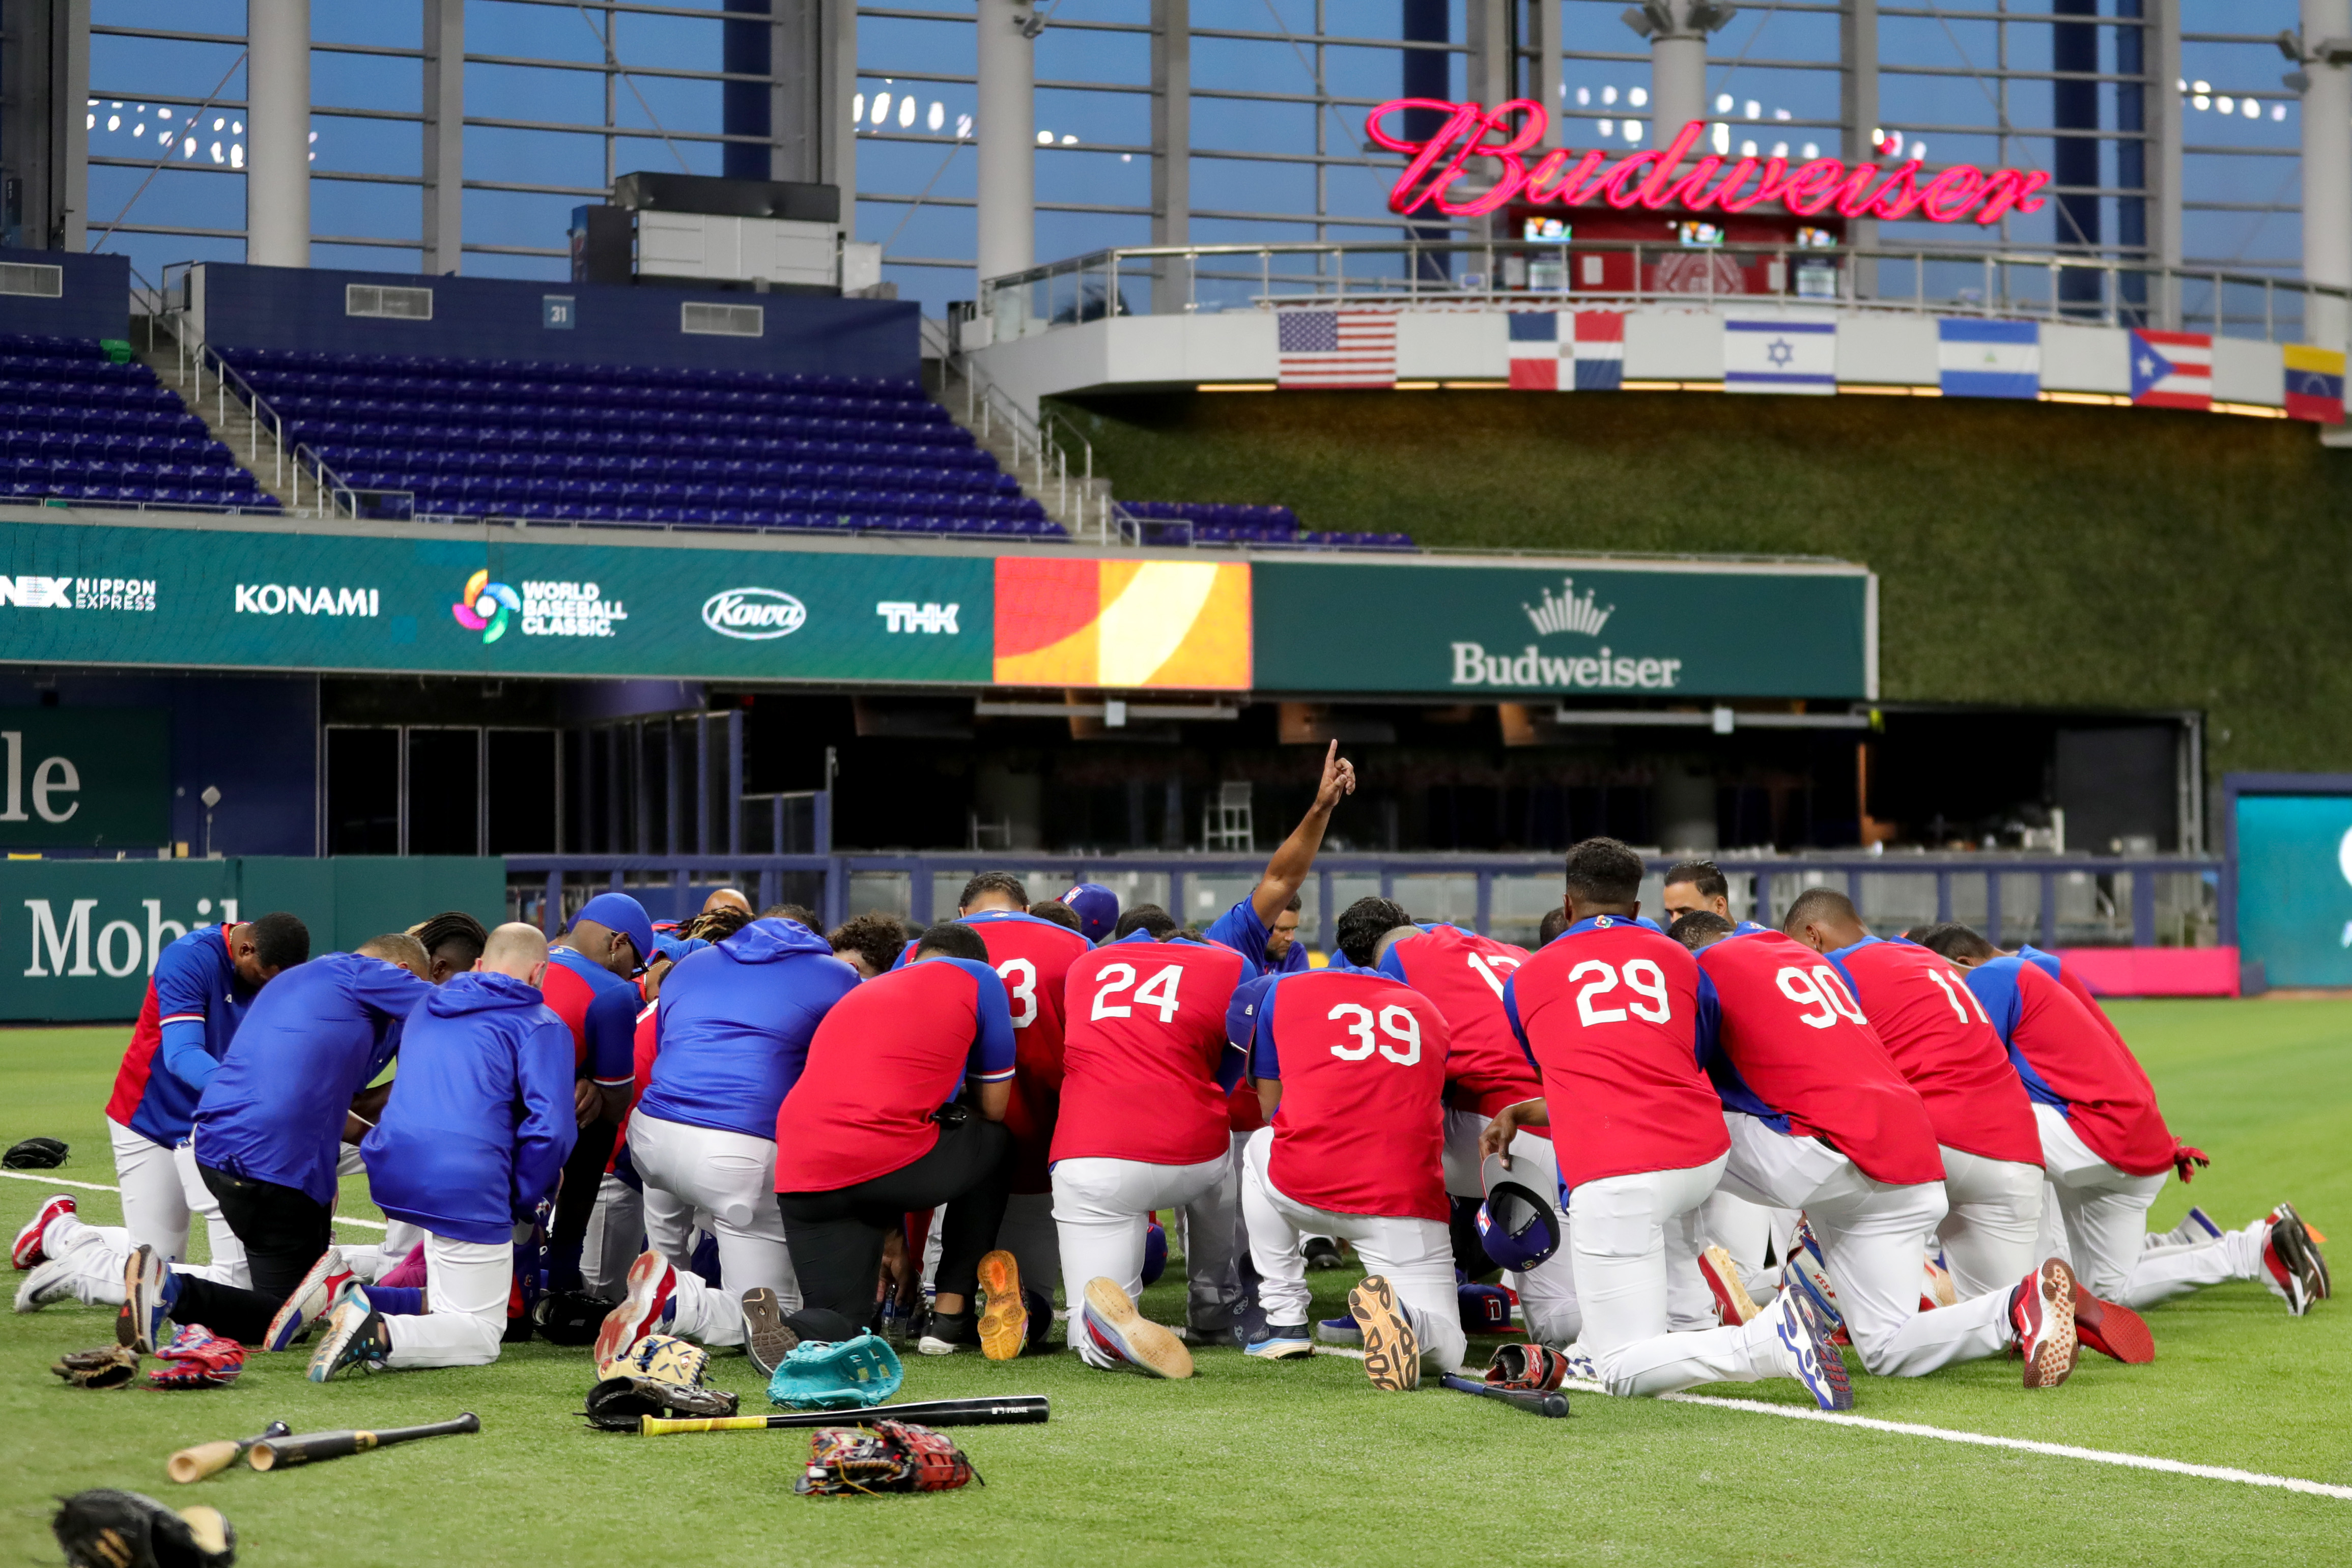 There's a world of interest in this year's World Baseball Classic - The  Boston Globe